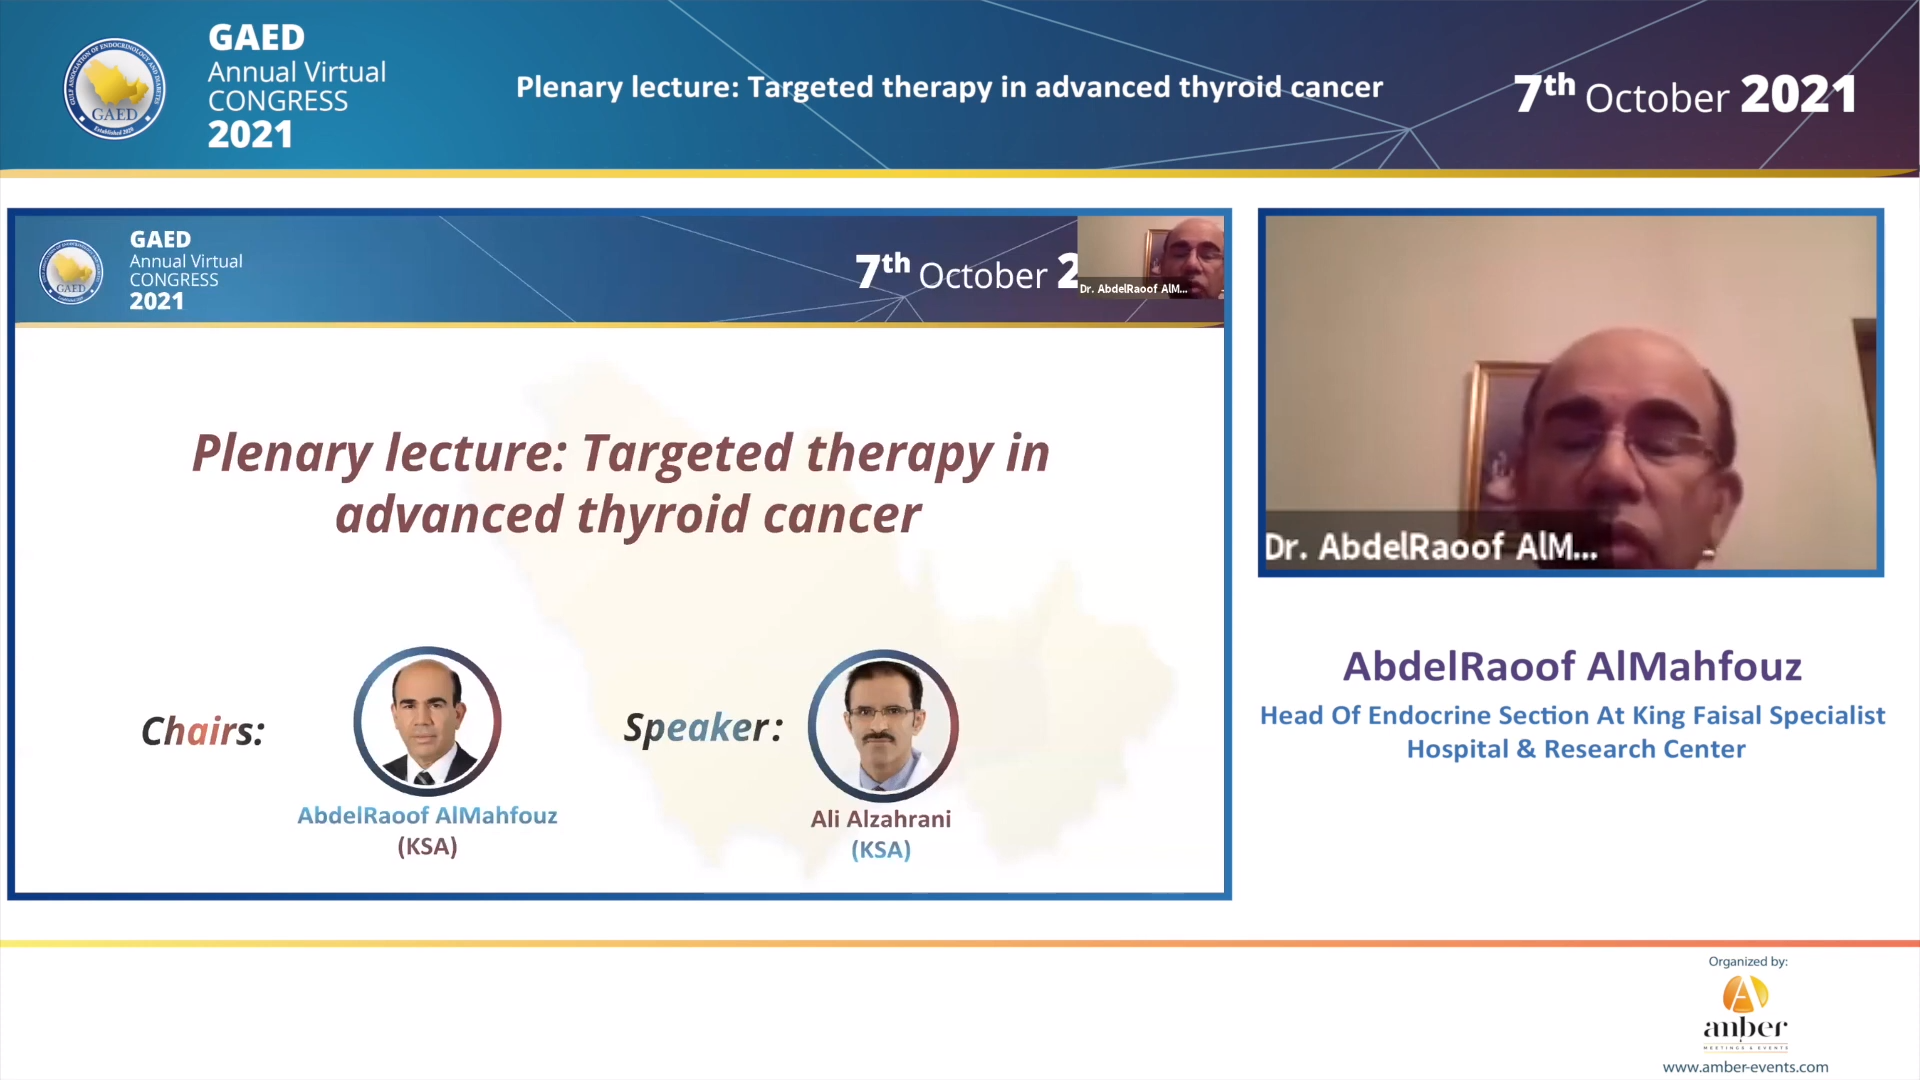 7.10.21 - Day 1, Plenary lecture - Targeted therapy in advanced thyroid cancer